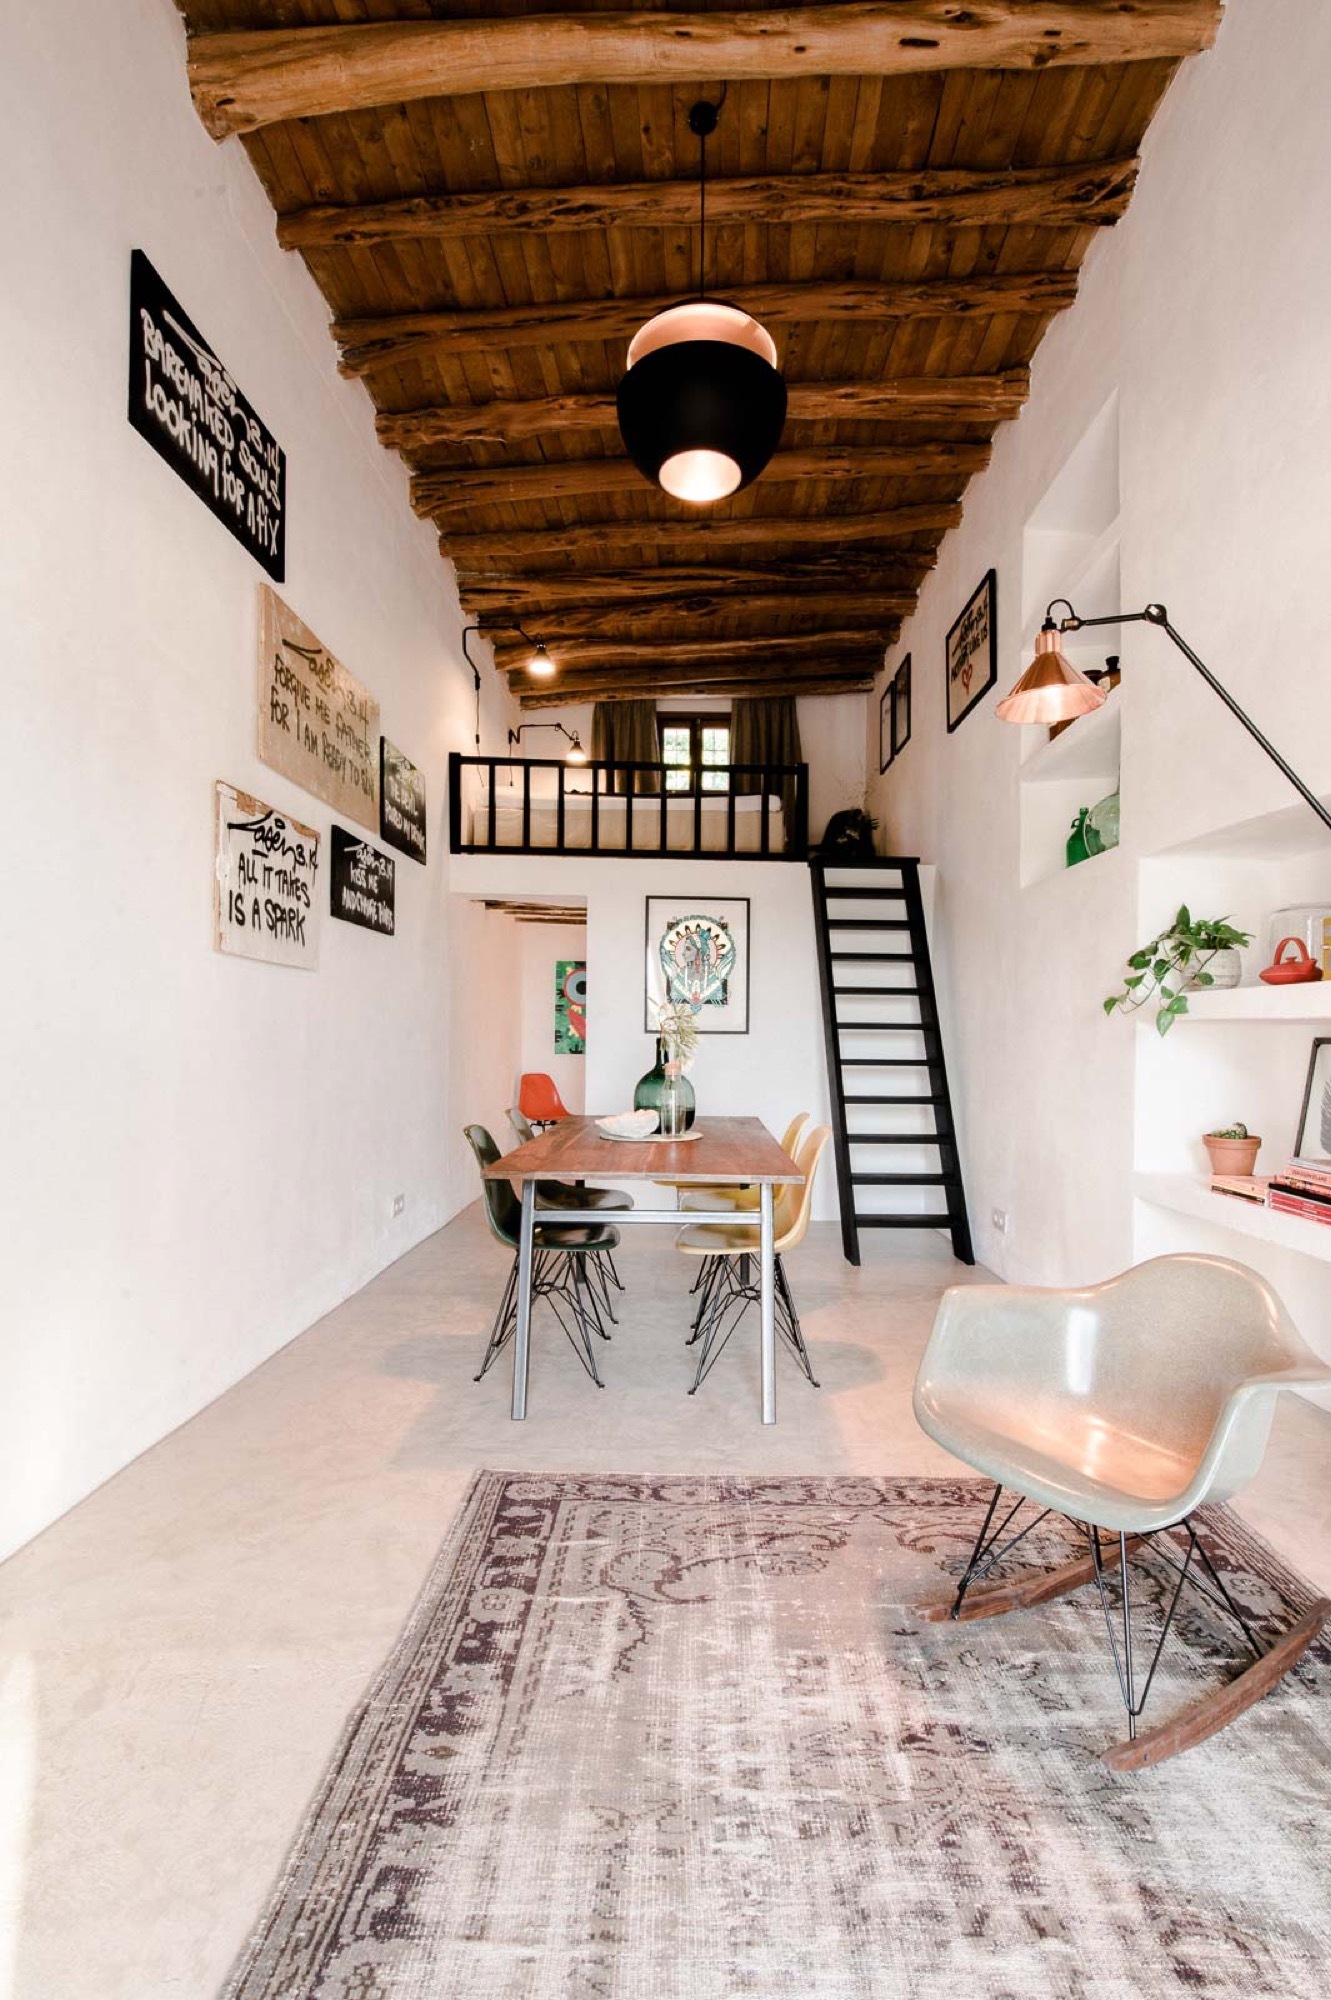 This eclectic house in Ibiza mixes original features and modern decor with effortless chic